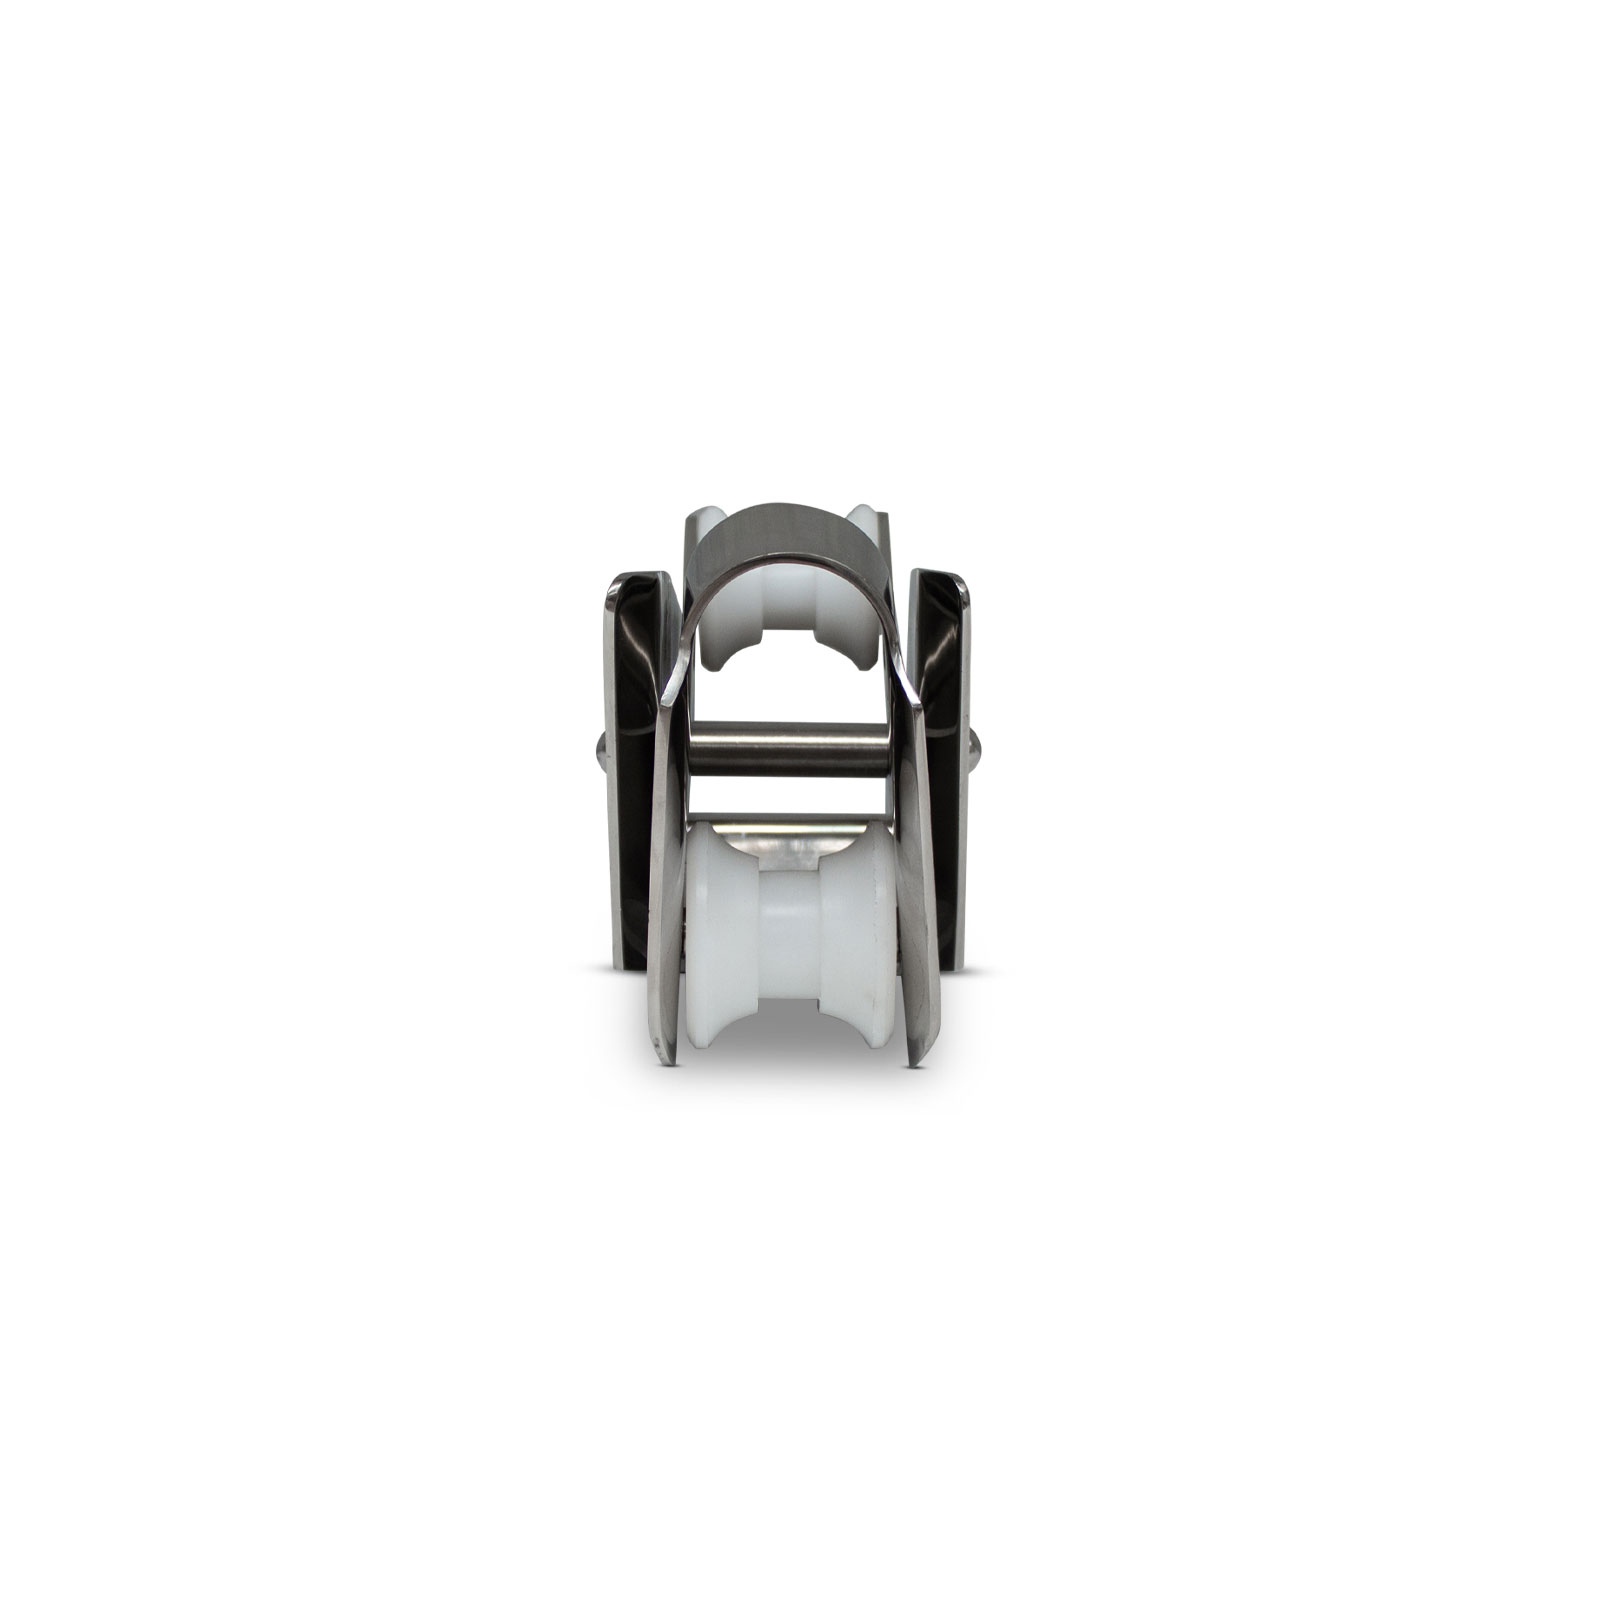 Savwinch Stainless Steel Swivel Bowsprit Small